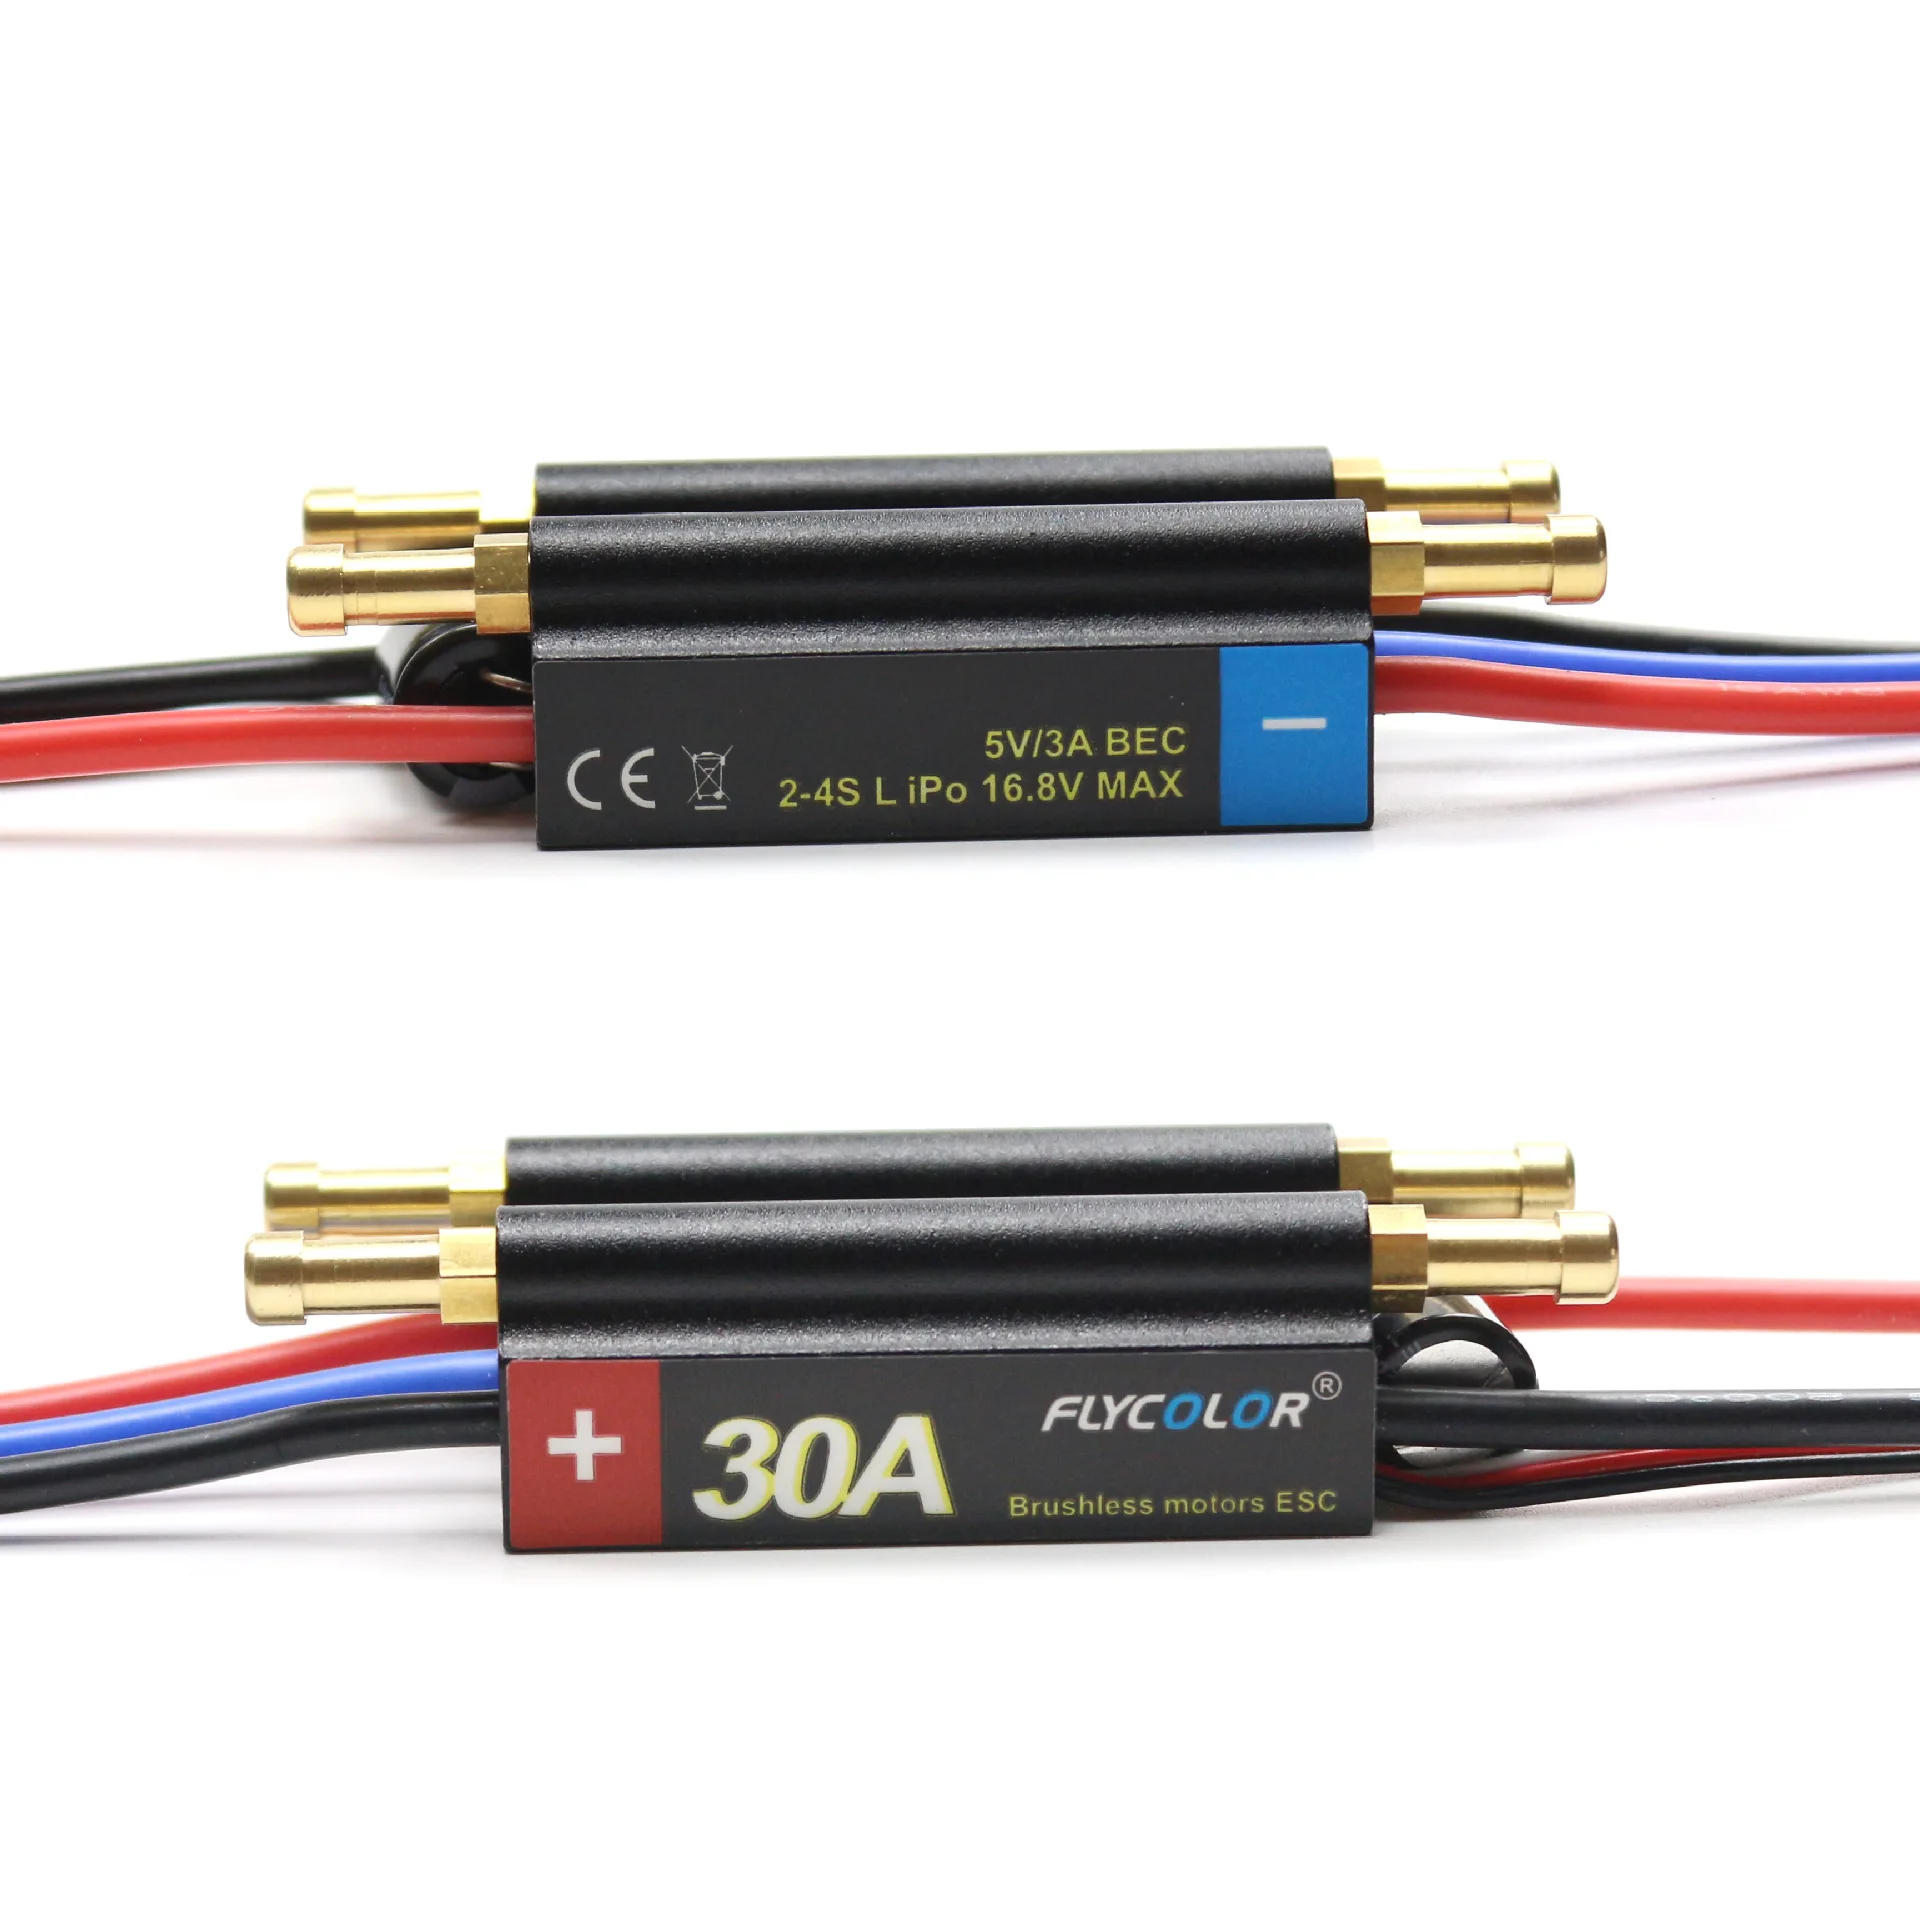 

FlyColor 30A 2-4S Lipo Water cooling ESC with 5V/3A BEC Boat ESC, Programmable Brushless Speed Controller ESC